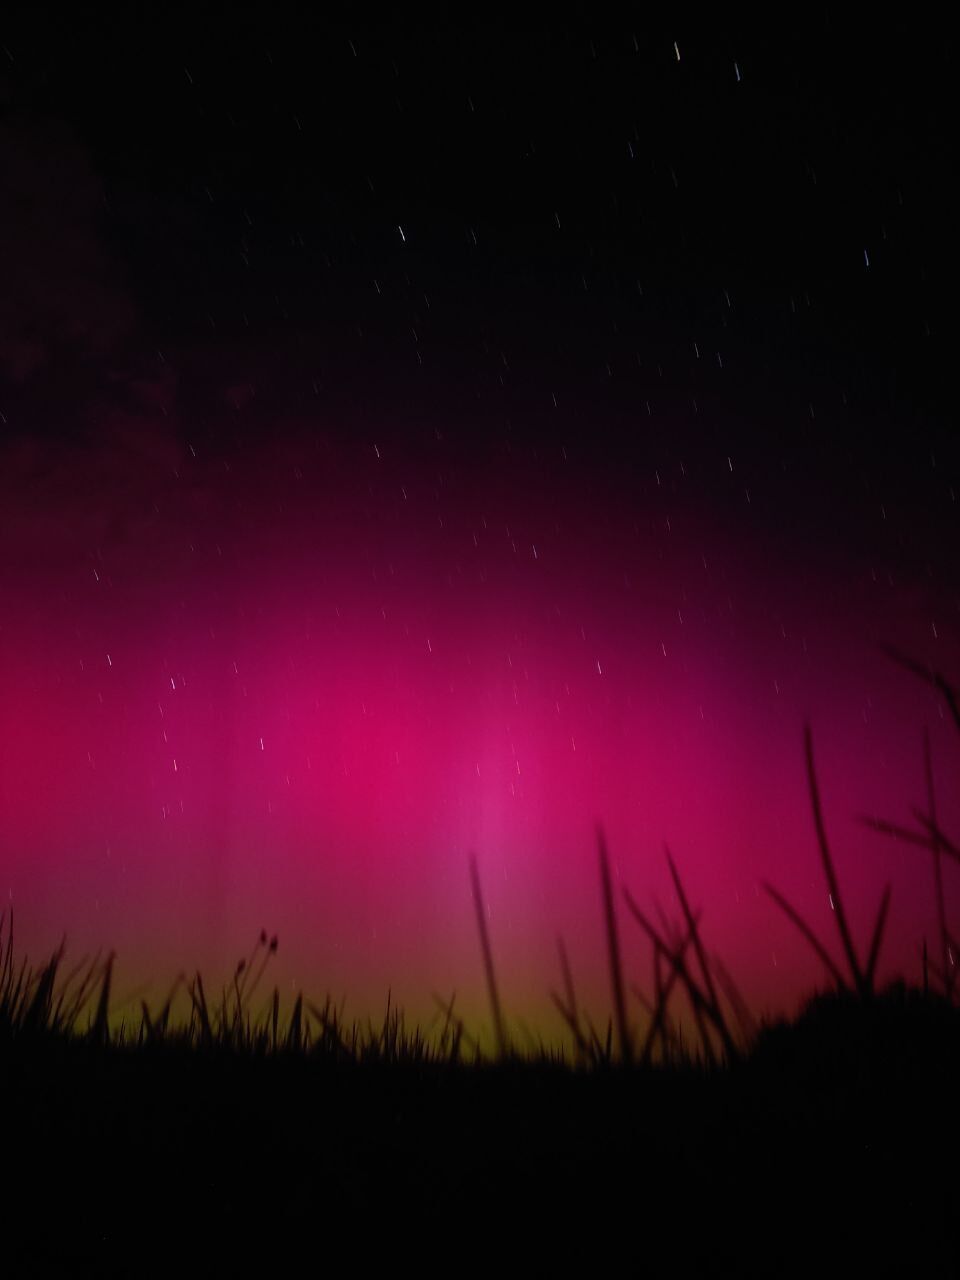 The Northern Lights in the sky over Ukraine.